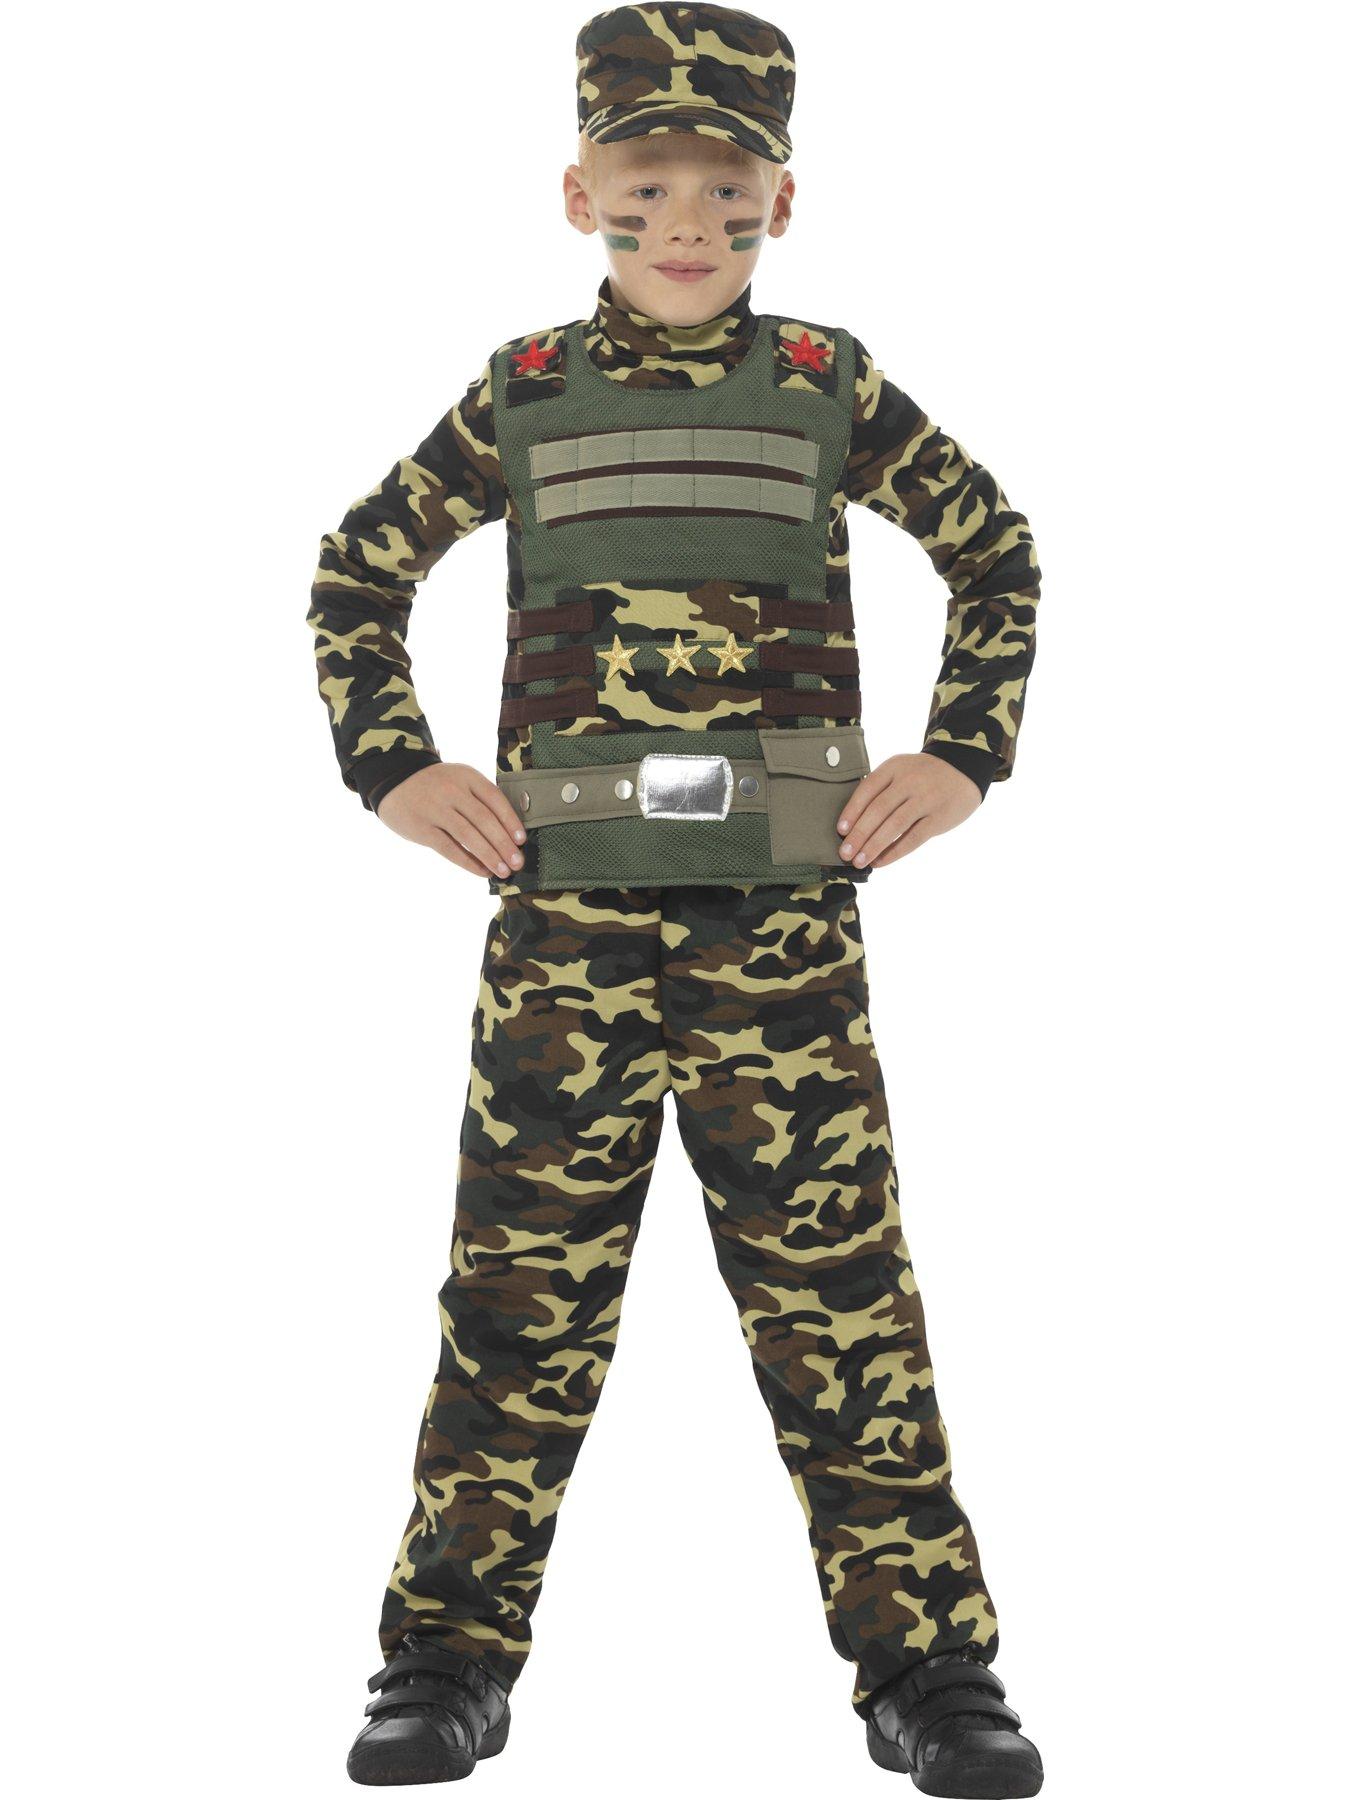  Army Costume for Kids Soldier Costume Military